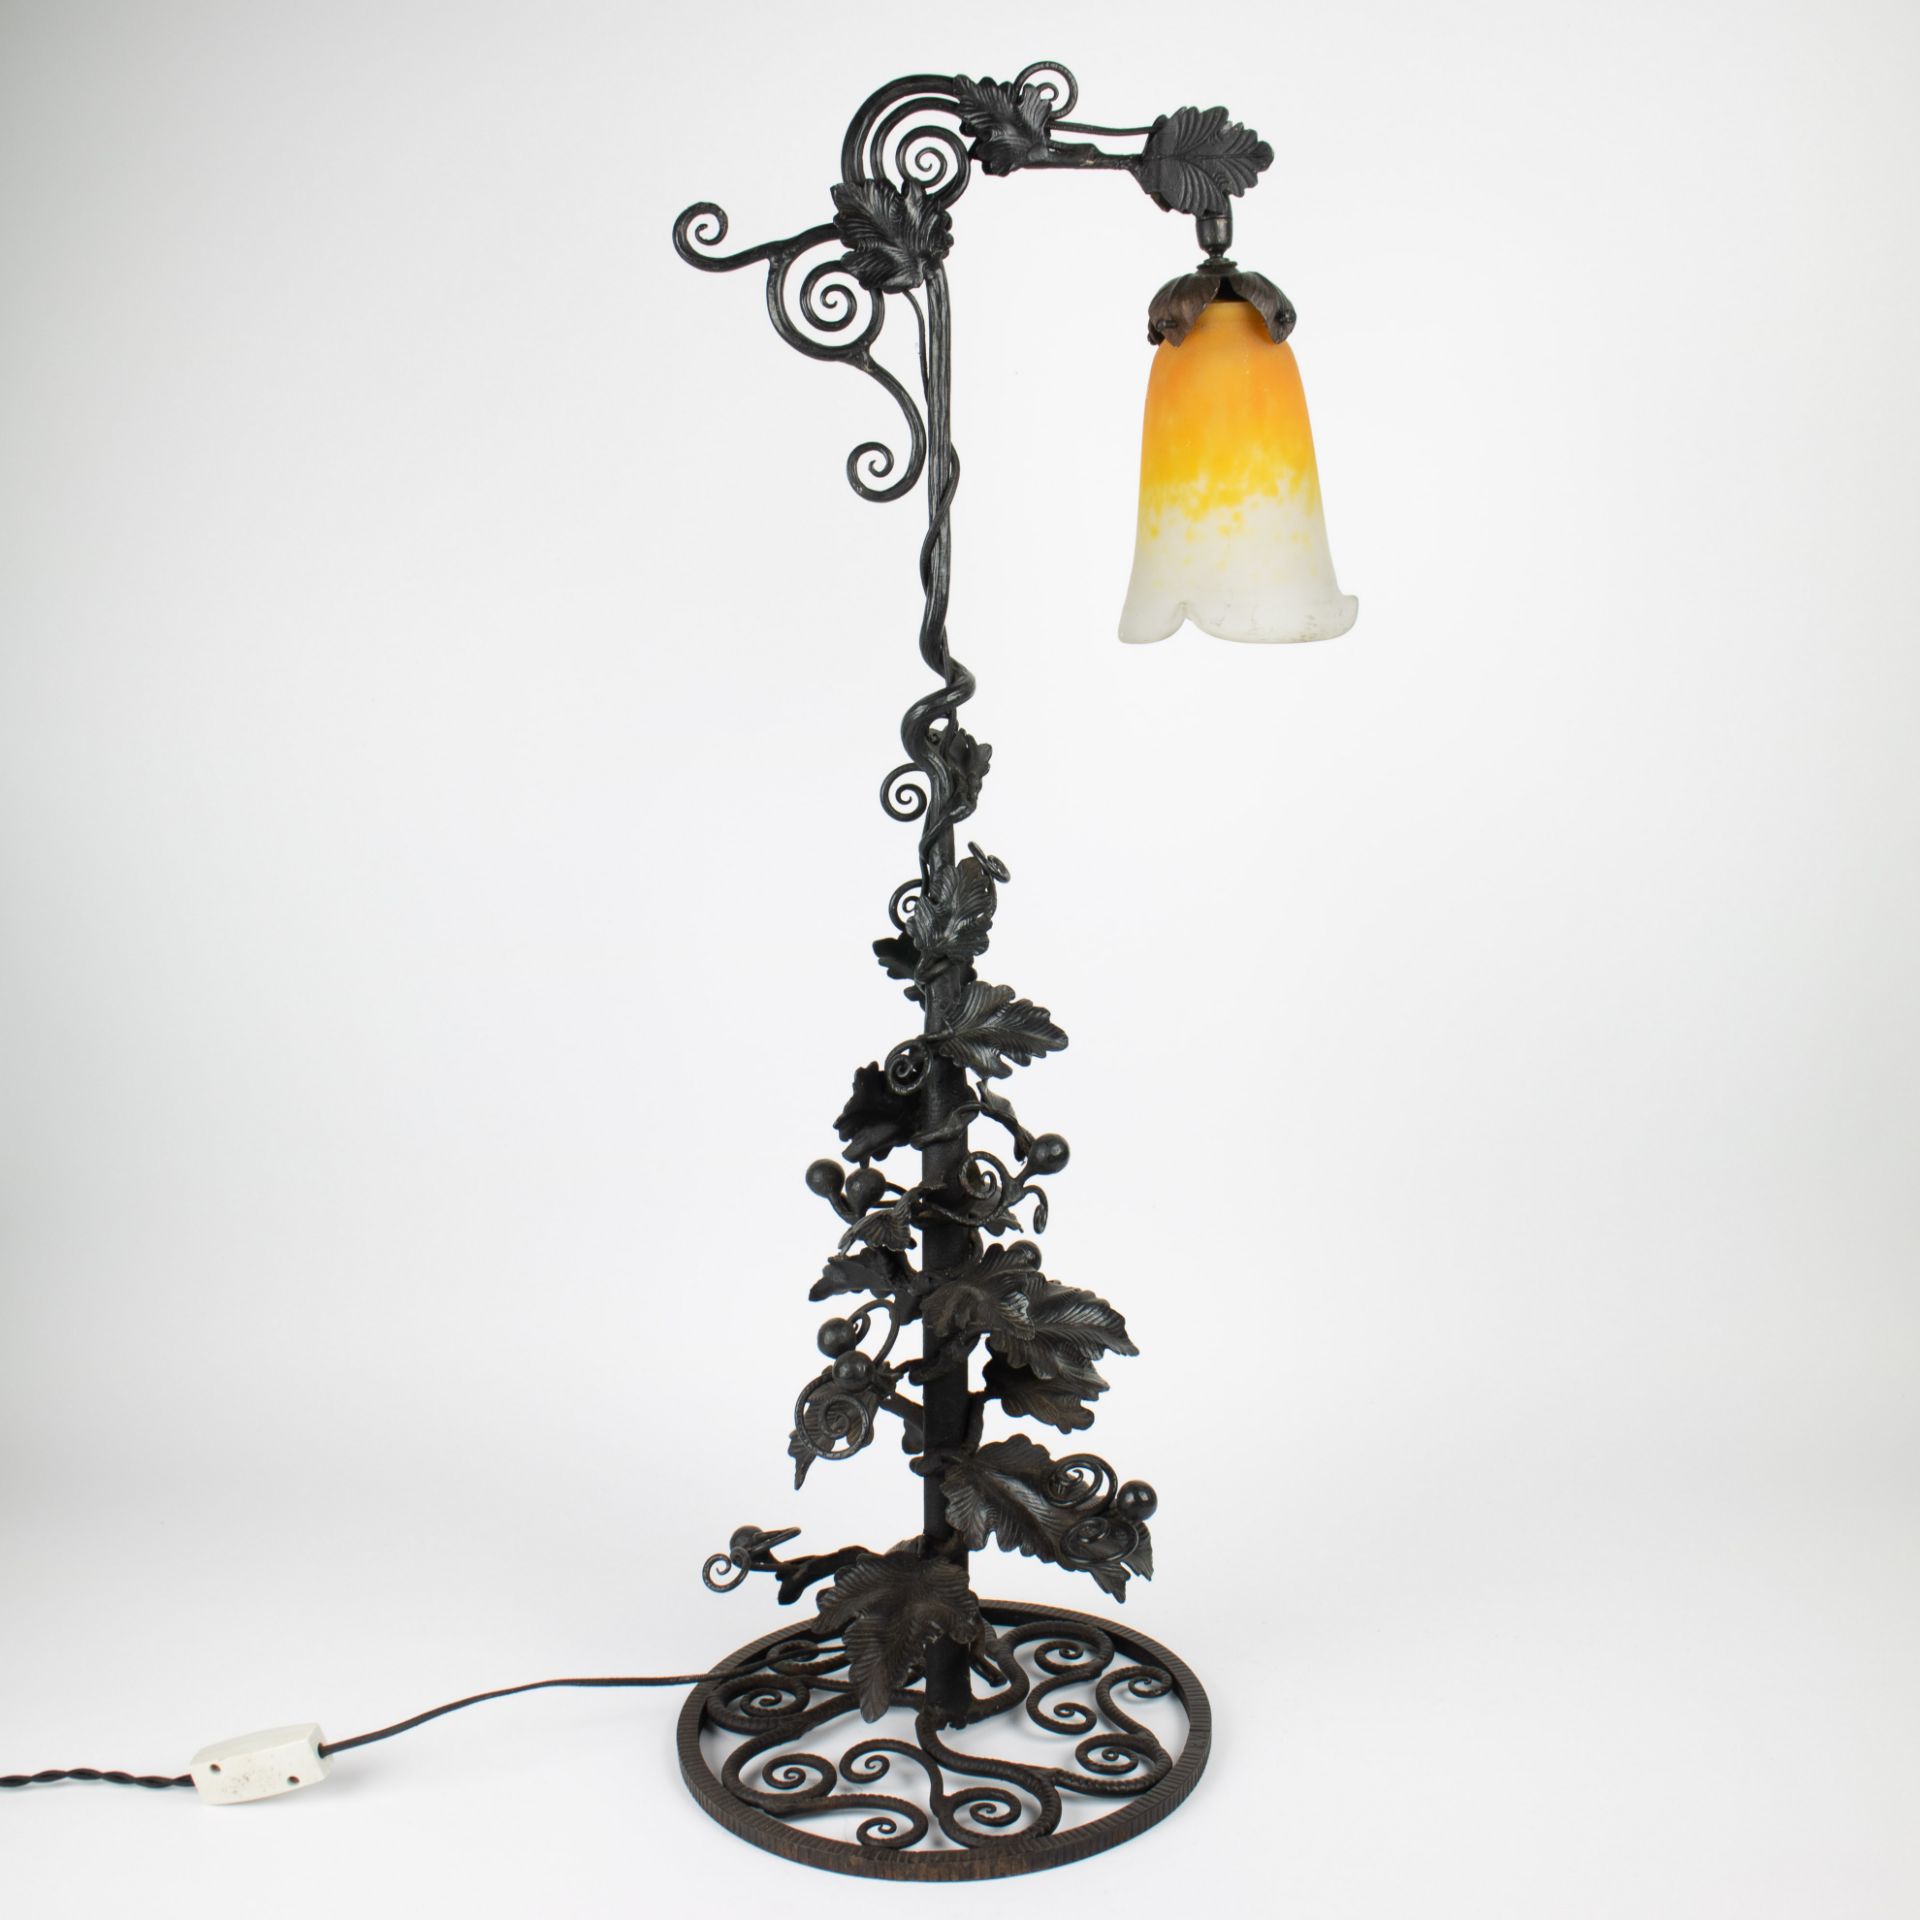 Art Deco cast iron lamp with Muller glass shade - Image 3 of 5